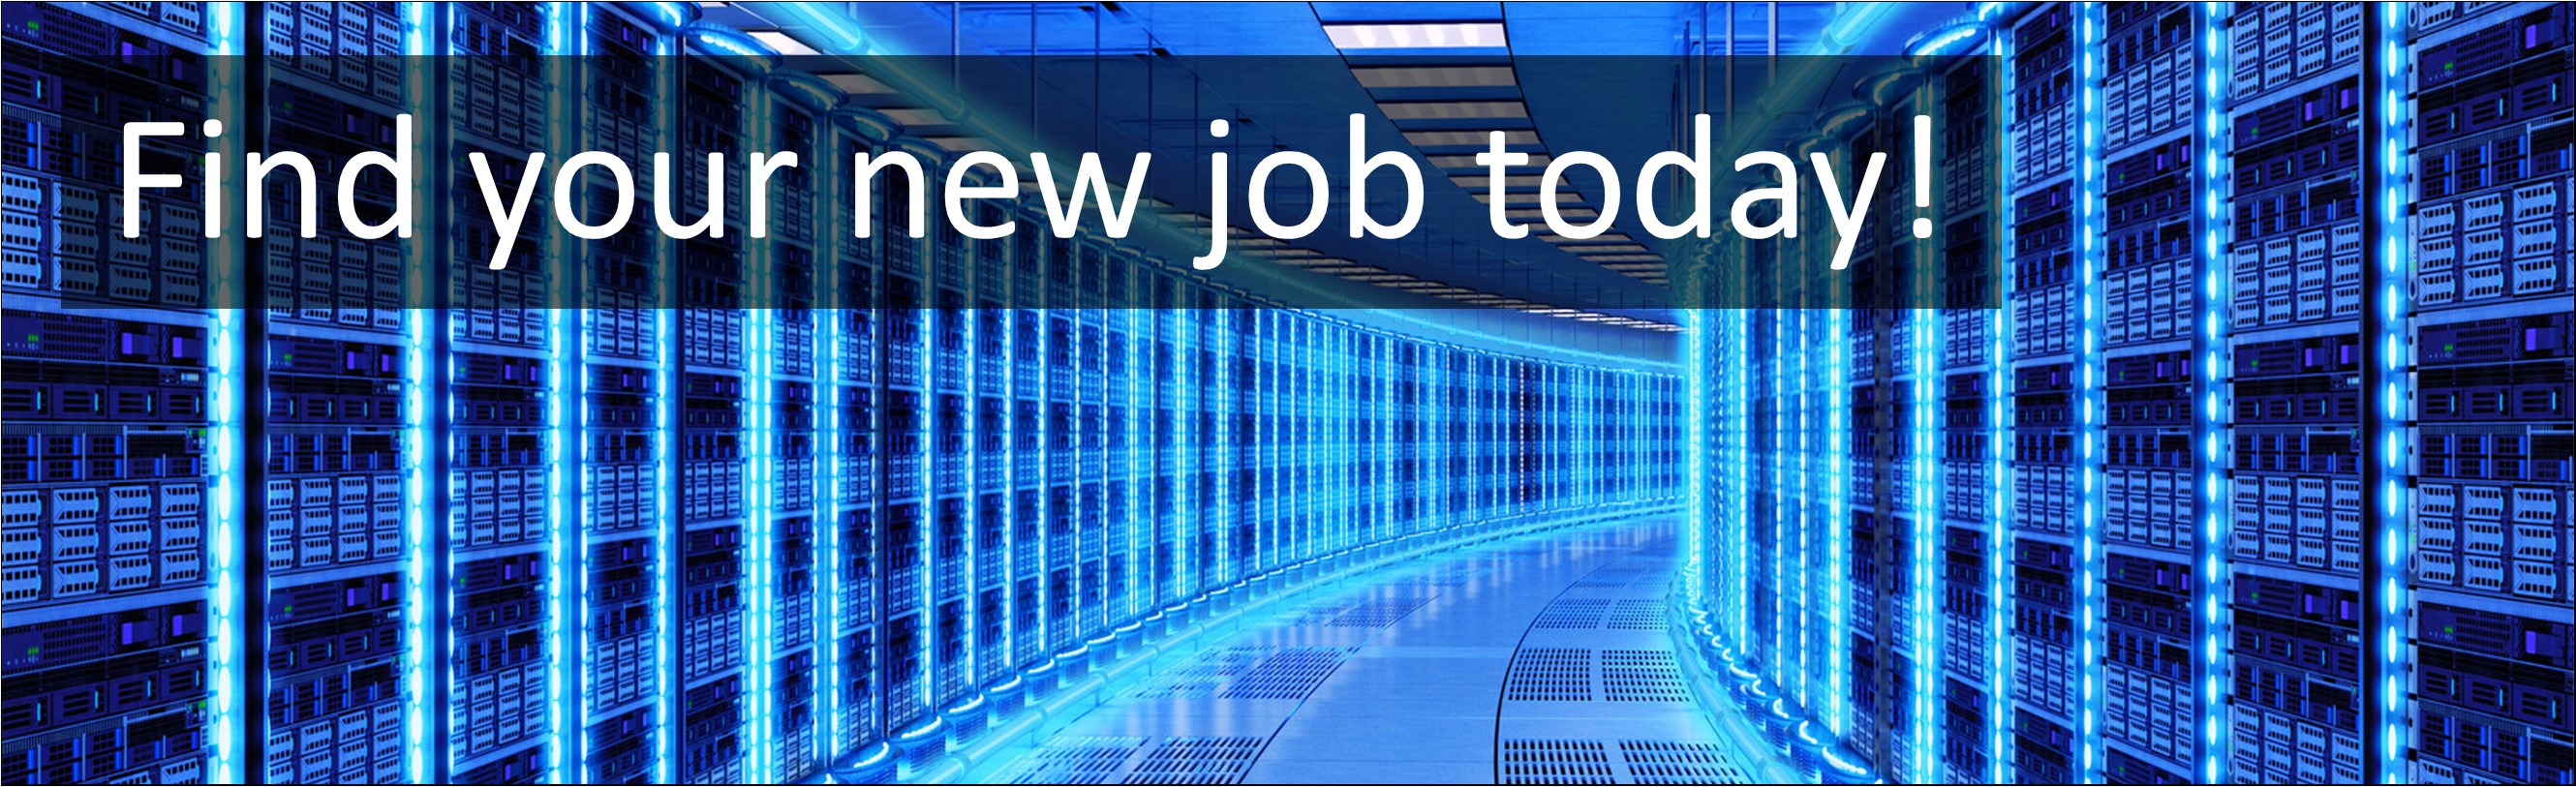 IT & Communication Jobs. IT Technical Support Field Service Engineer Jobs, Careers & Vacancies in Bristol, South West England Advertised by AWD online – Multi-Job Board Advertising and CV Sourcing Recruitment Services